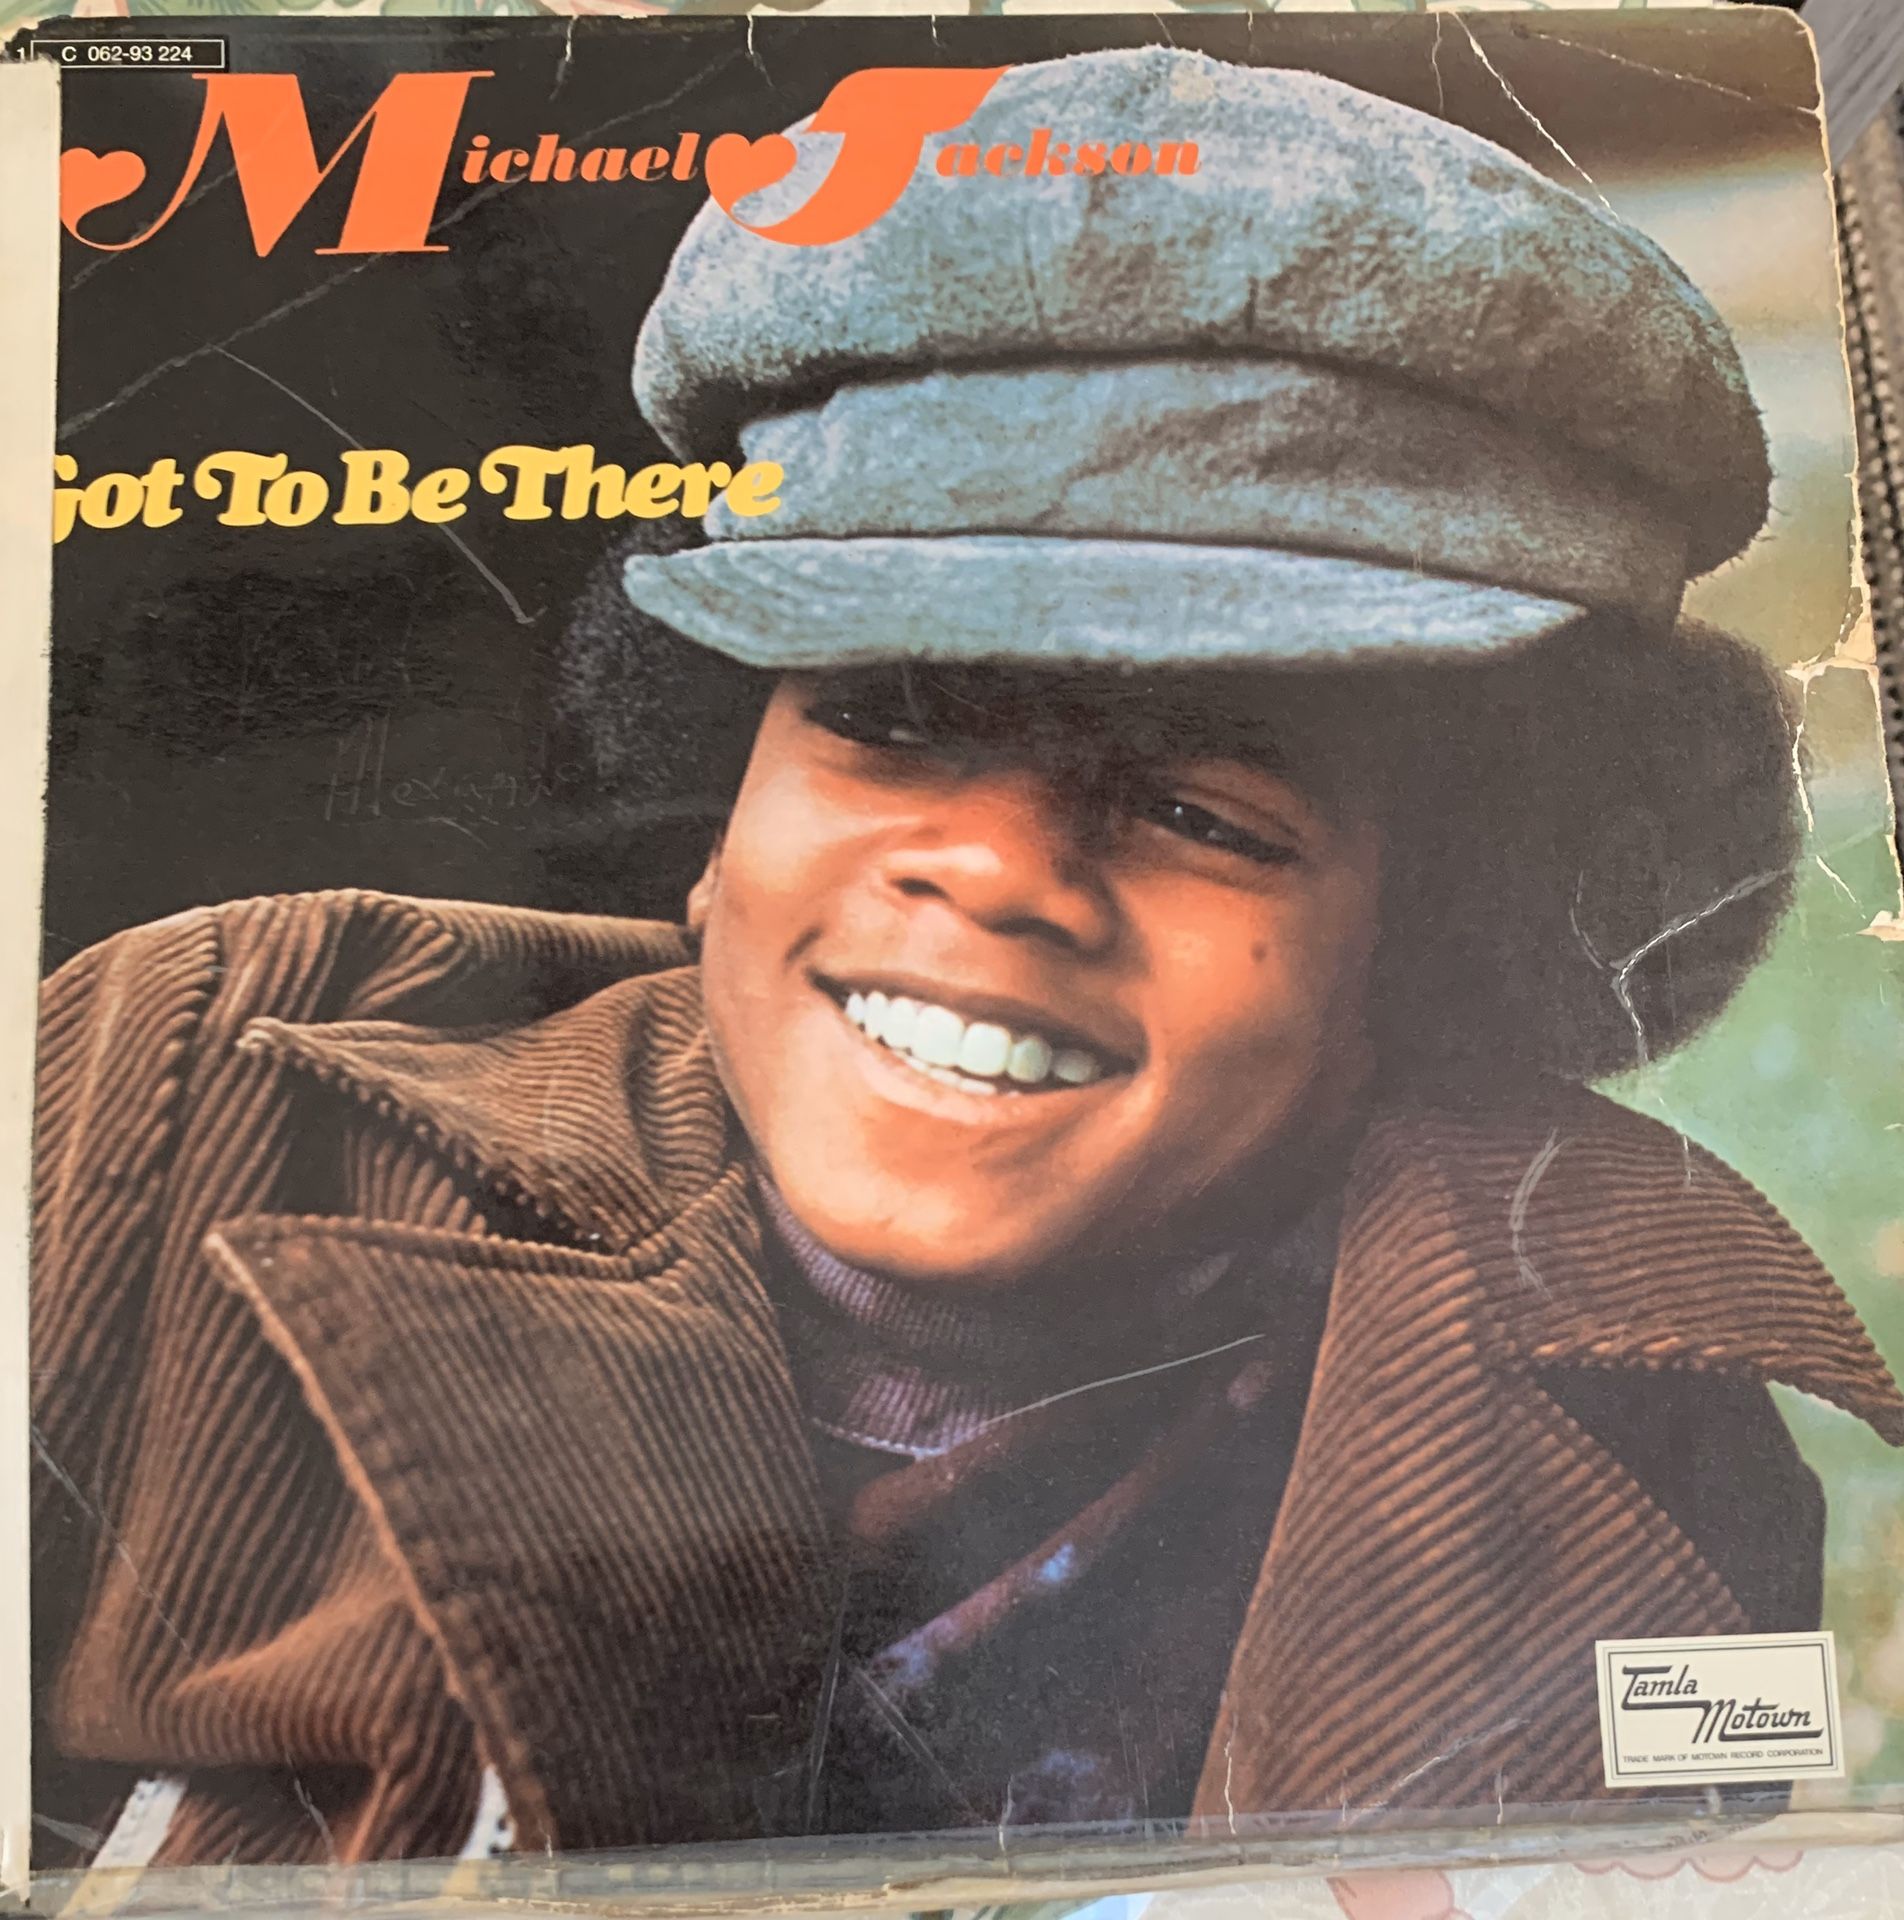 1972 Michael Jackson “Got to be There” vinyl